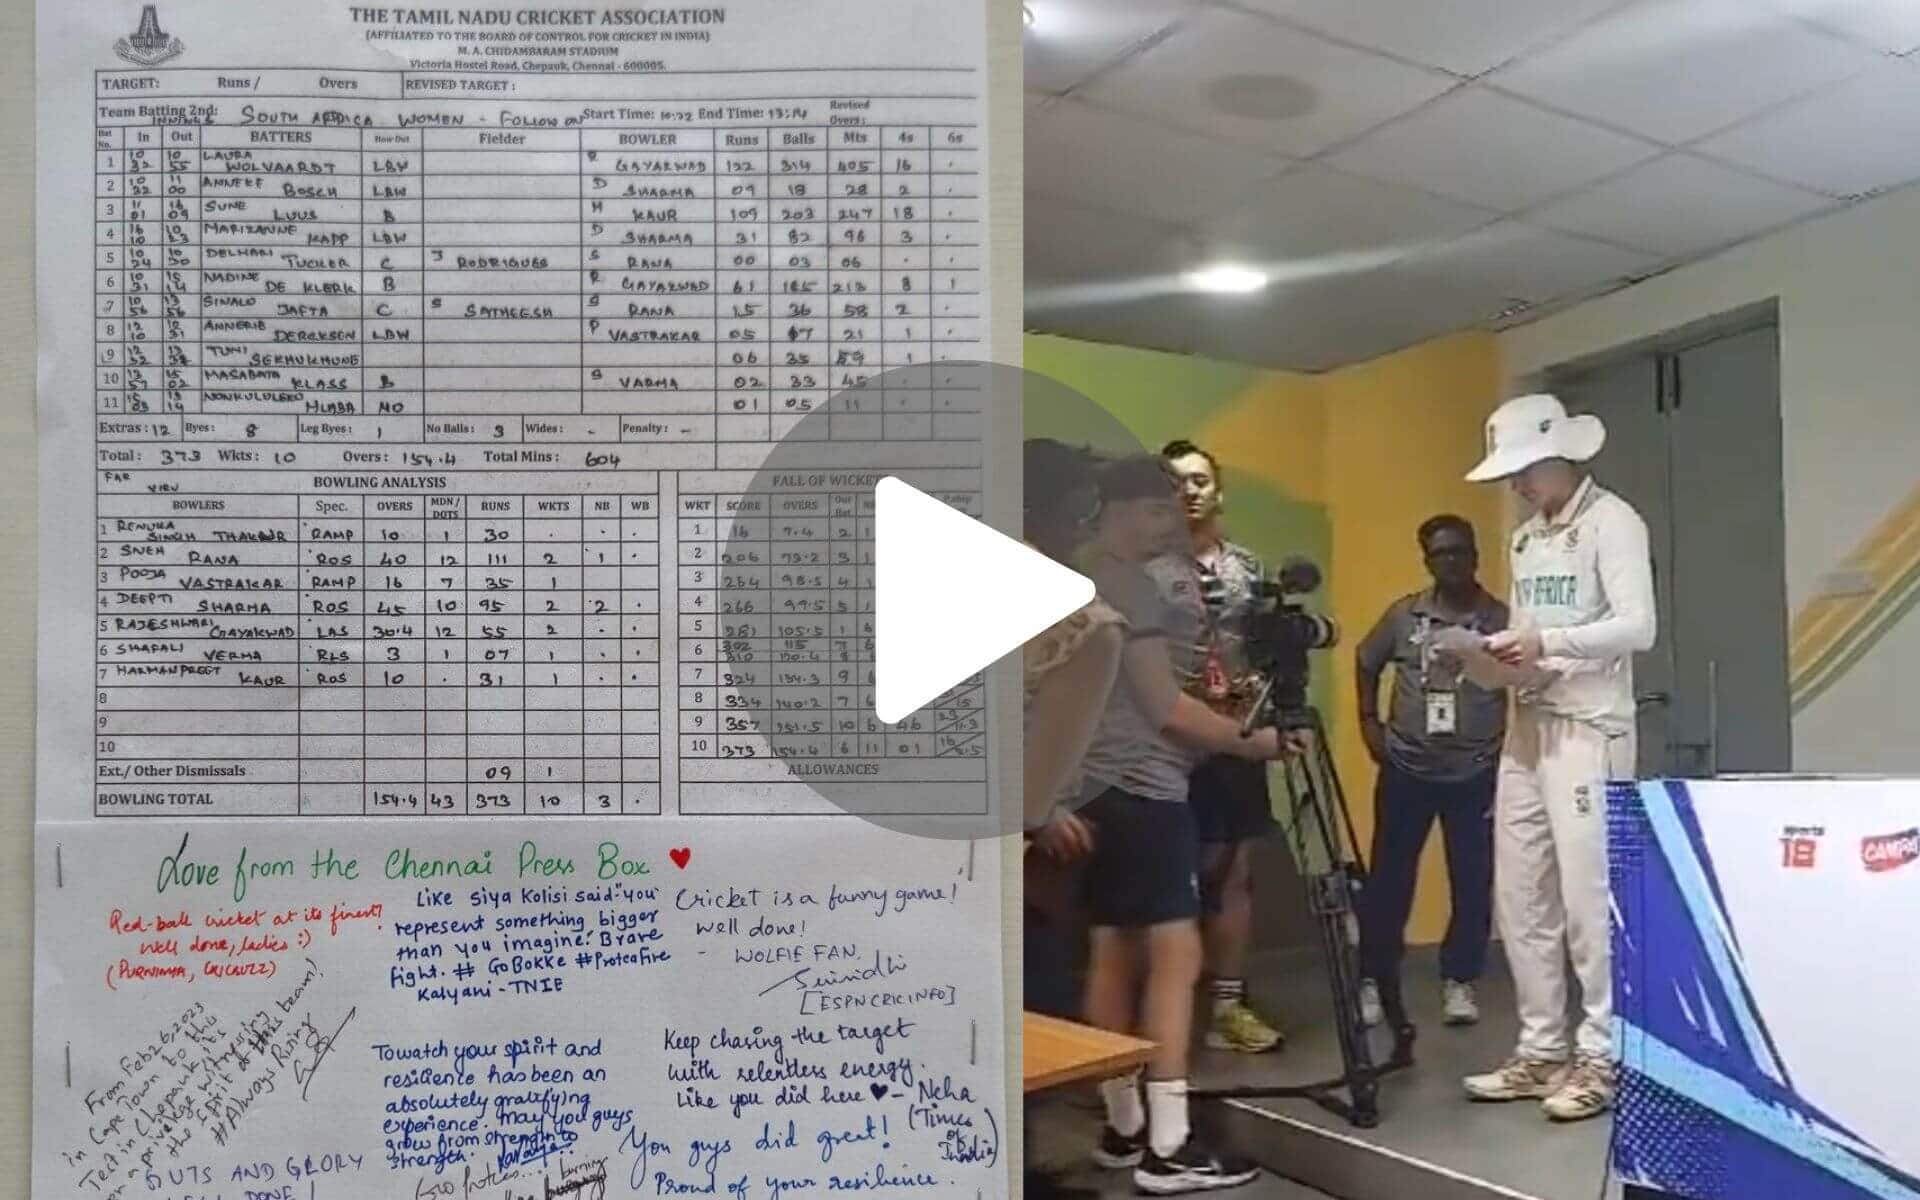 [Watch] Laura Wolvaardt Gets Signed Team Sheet From Journalists After IND-W Vs SA-W Test